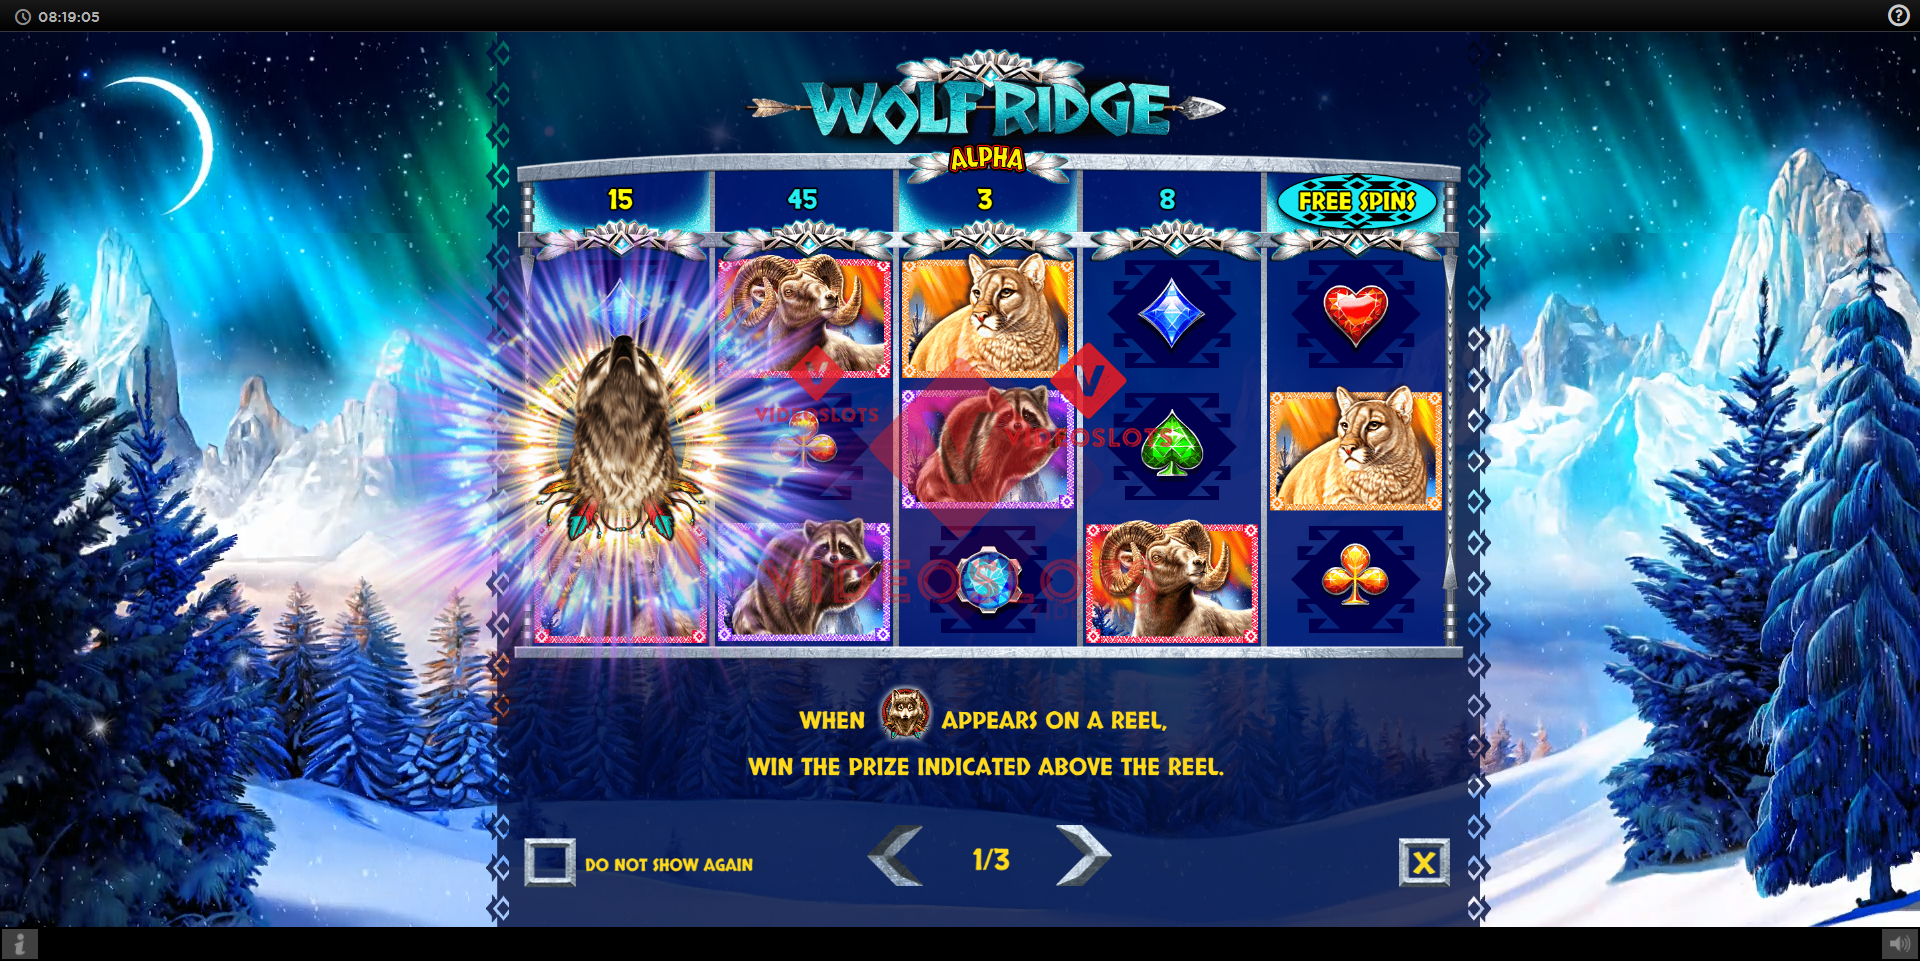 Game Intro for Wolf Ridge slot from IGT